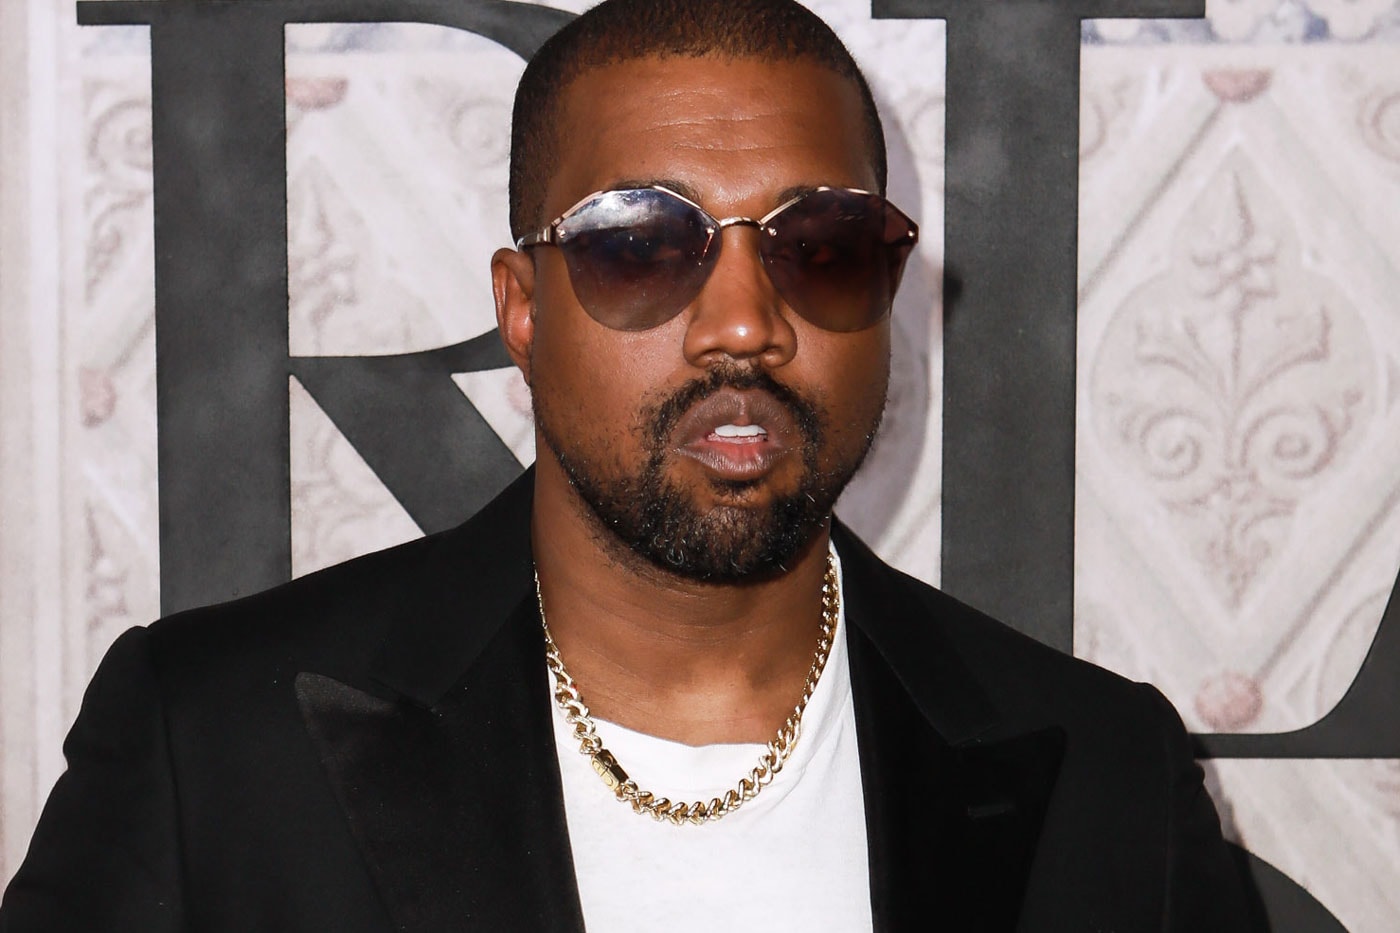 Kanye West Tweeted That He's Finishing up His Latest Album and Collection